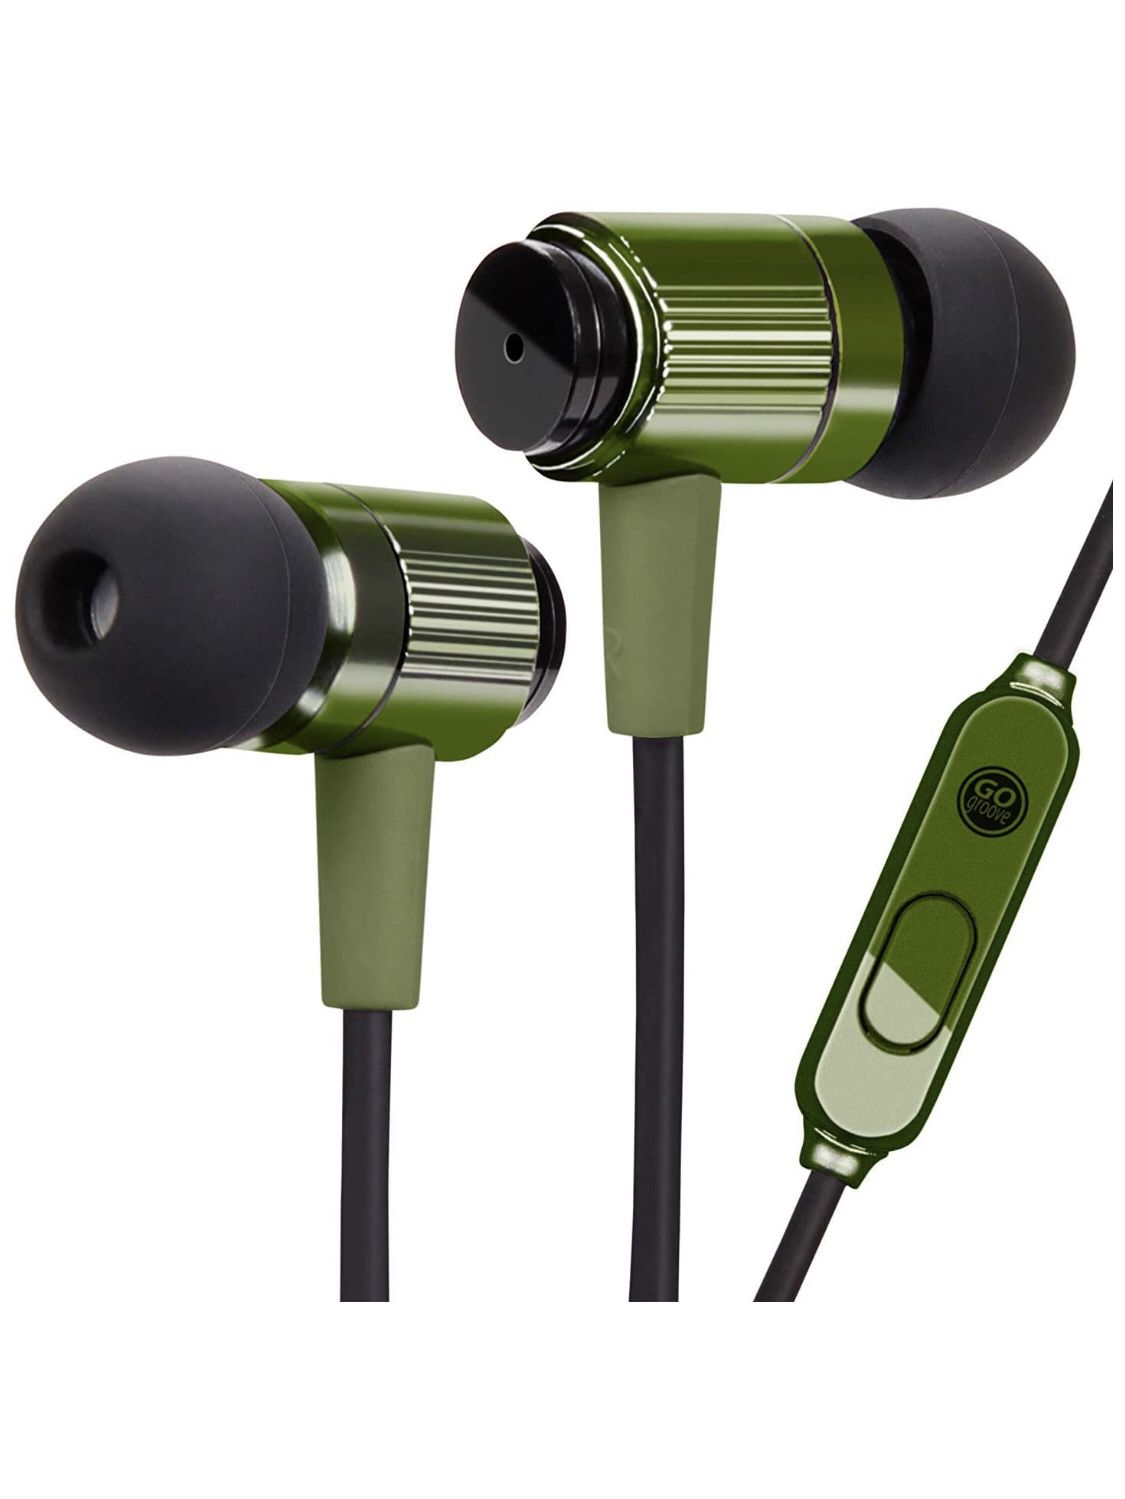 GOgroove AudiOHM RNF Durable Earbuds - Heavy Duty Headphones with Thick Aramid Fiber Reinforced Cable, In-Line Microphone, In-Ear Noise Isolation & R